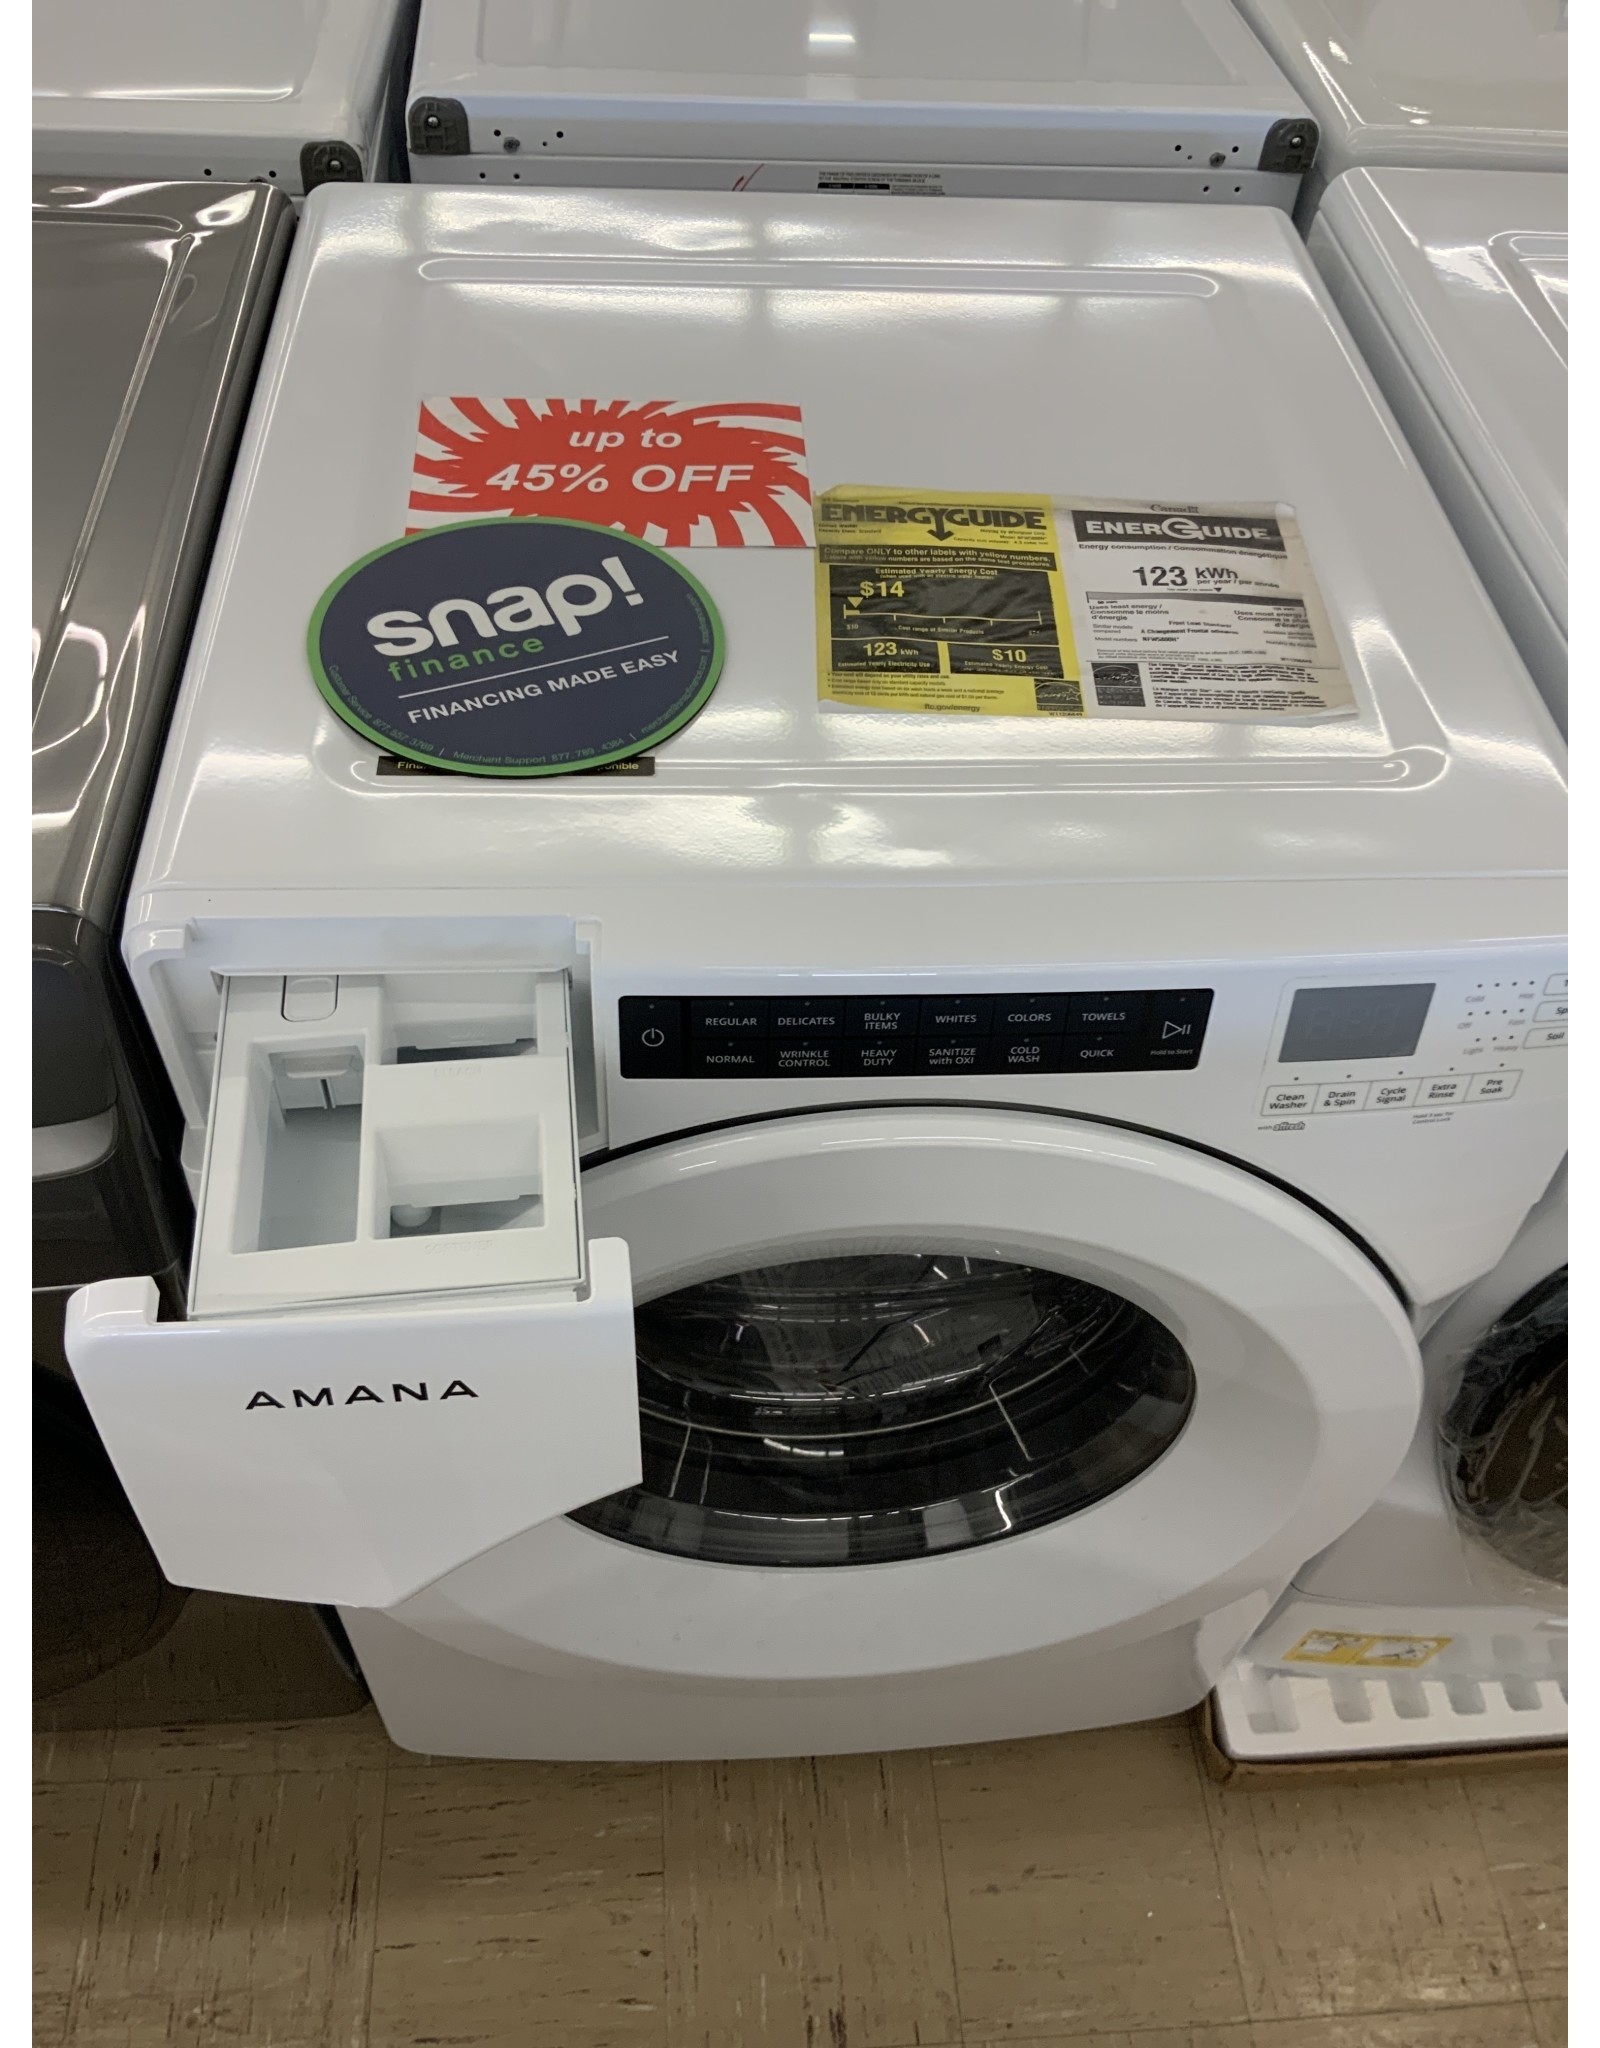 NFW5800HW 4.3 cu. ft. ENERGY STAR Qualified White Front Load Washer with Large Capacity